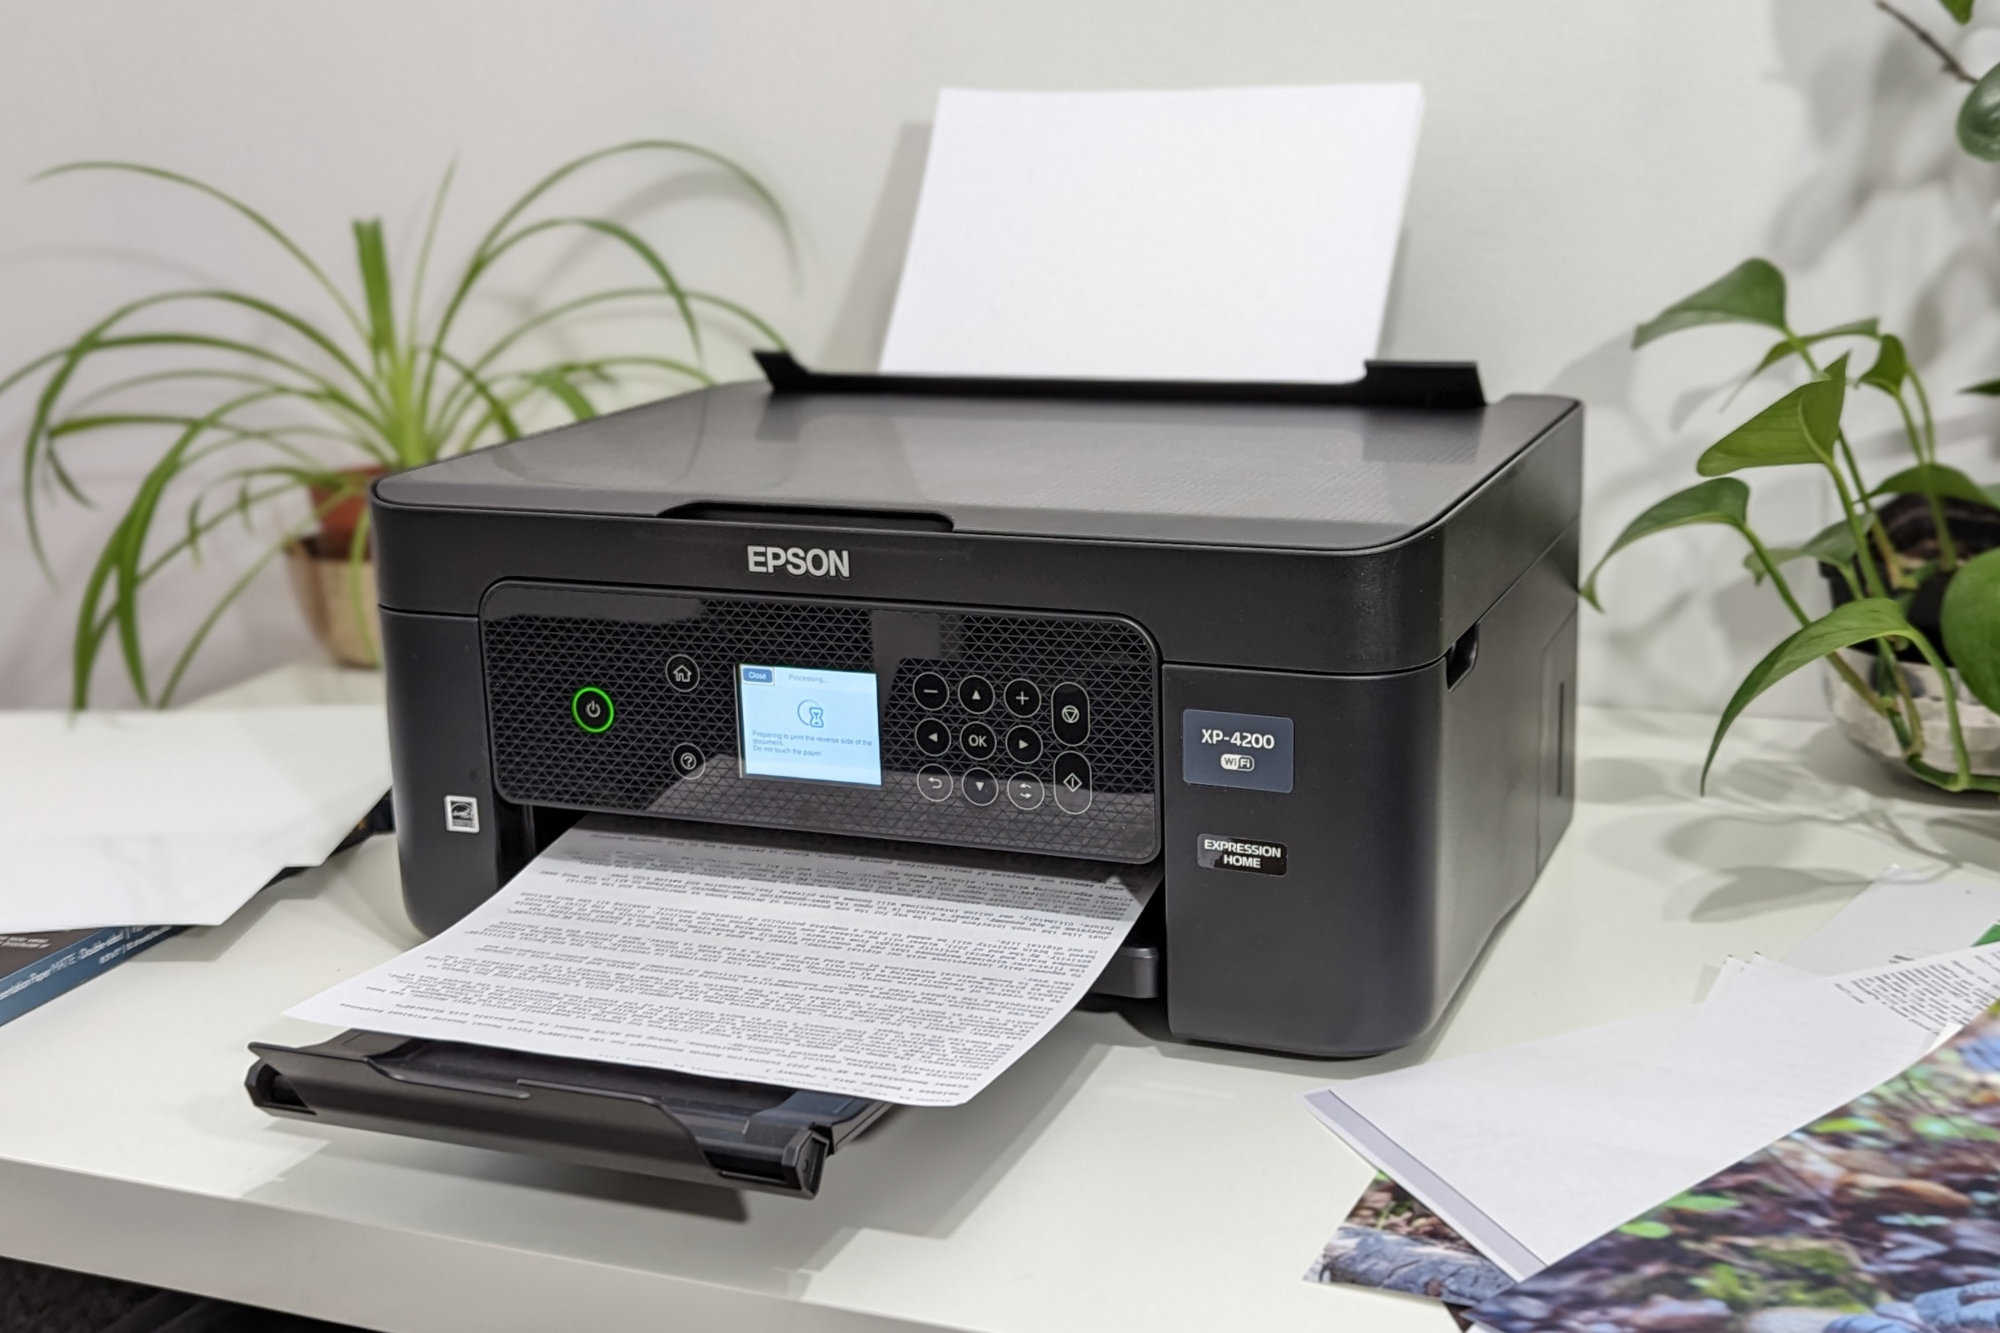 Epson Expression Home XP-4100 Small-in-One Printer, Ink